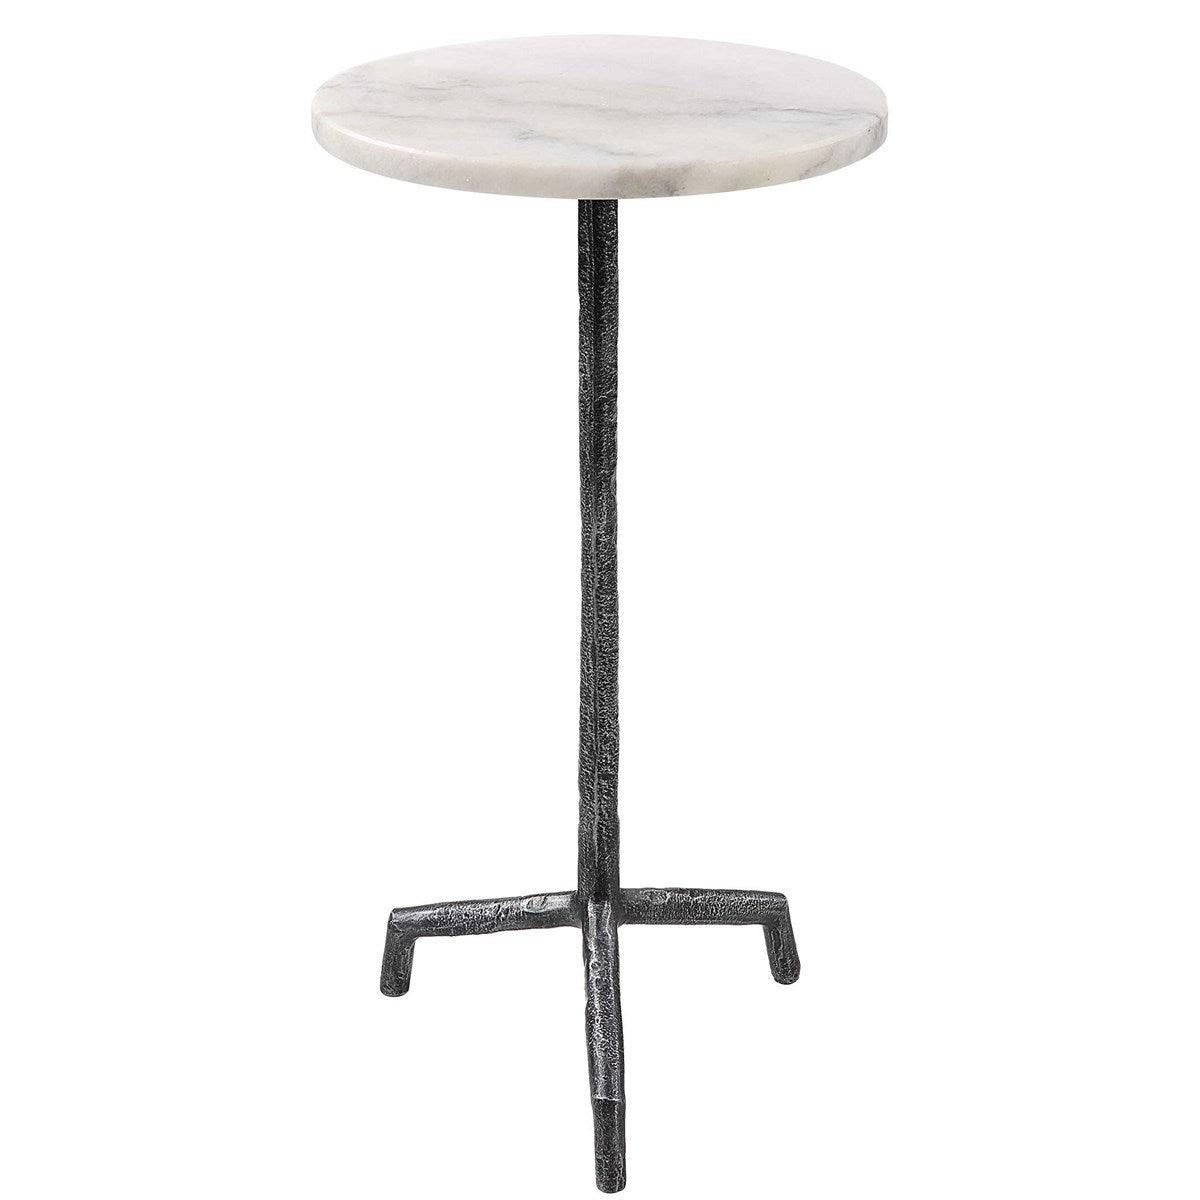 The Uttermost - Puritan Drink Table - 22897 | Montreal Lighting & Hardware